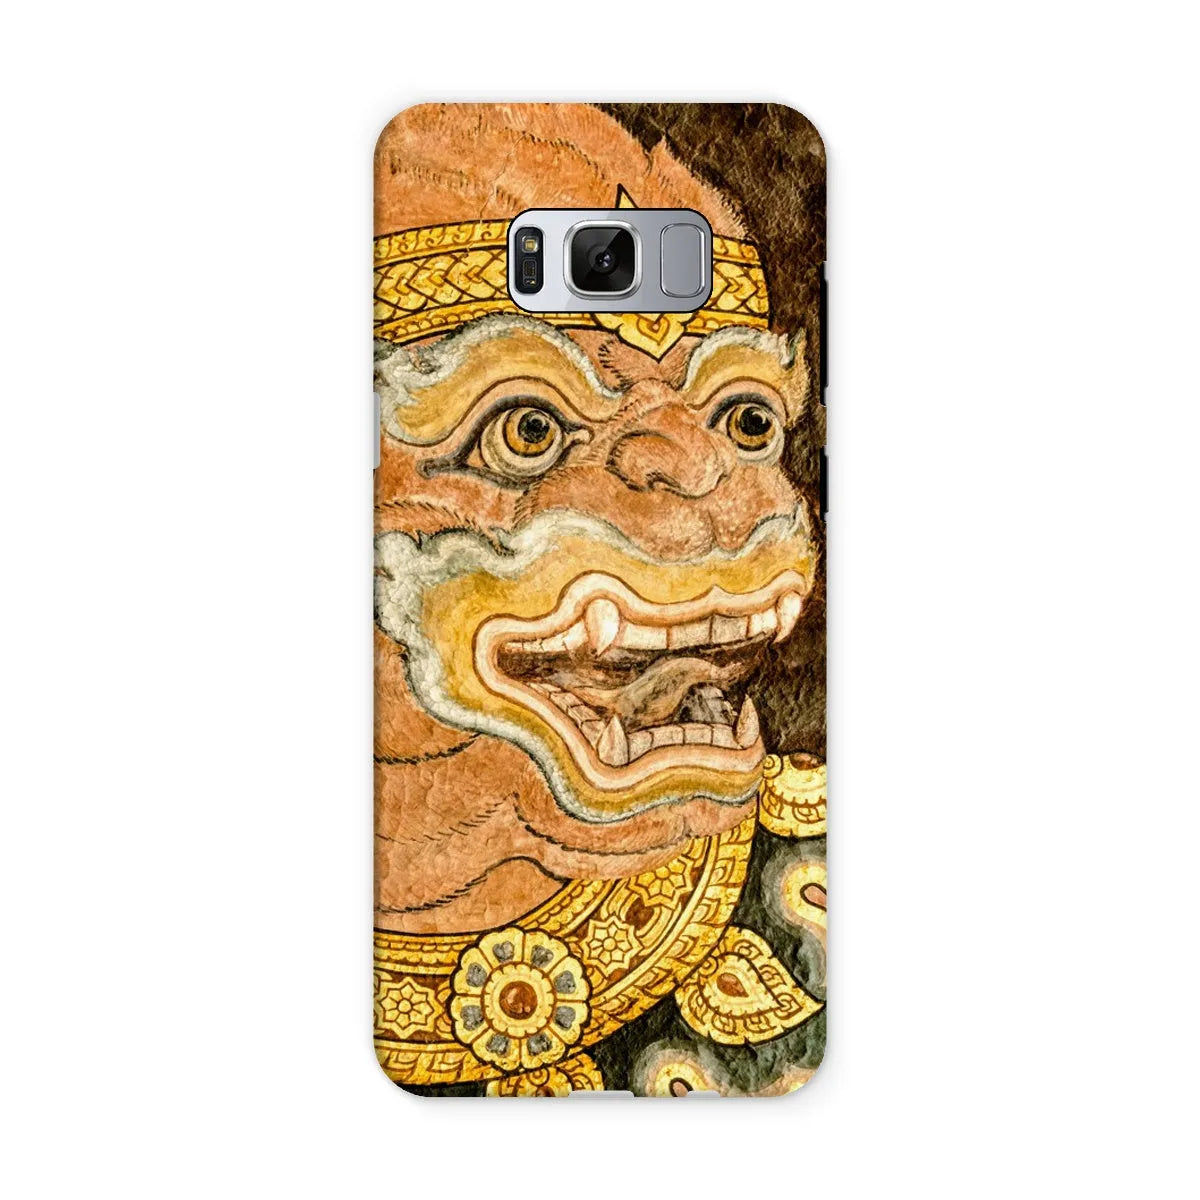 Monkey See - Traditional Thai Aesthetic Art Phone Case - Samsung Galaxy S8 / Matte - Mobile Phone Cases - Aesthetic Art